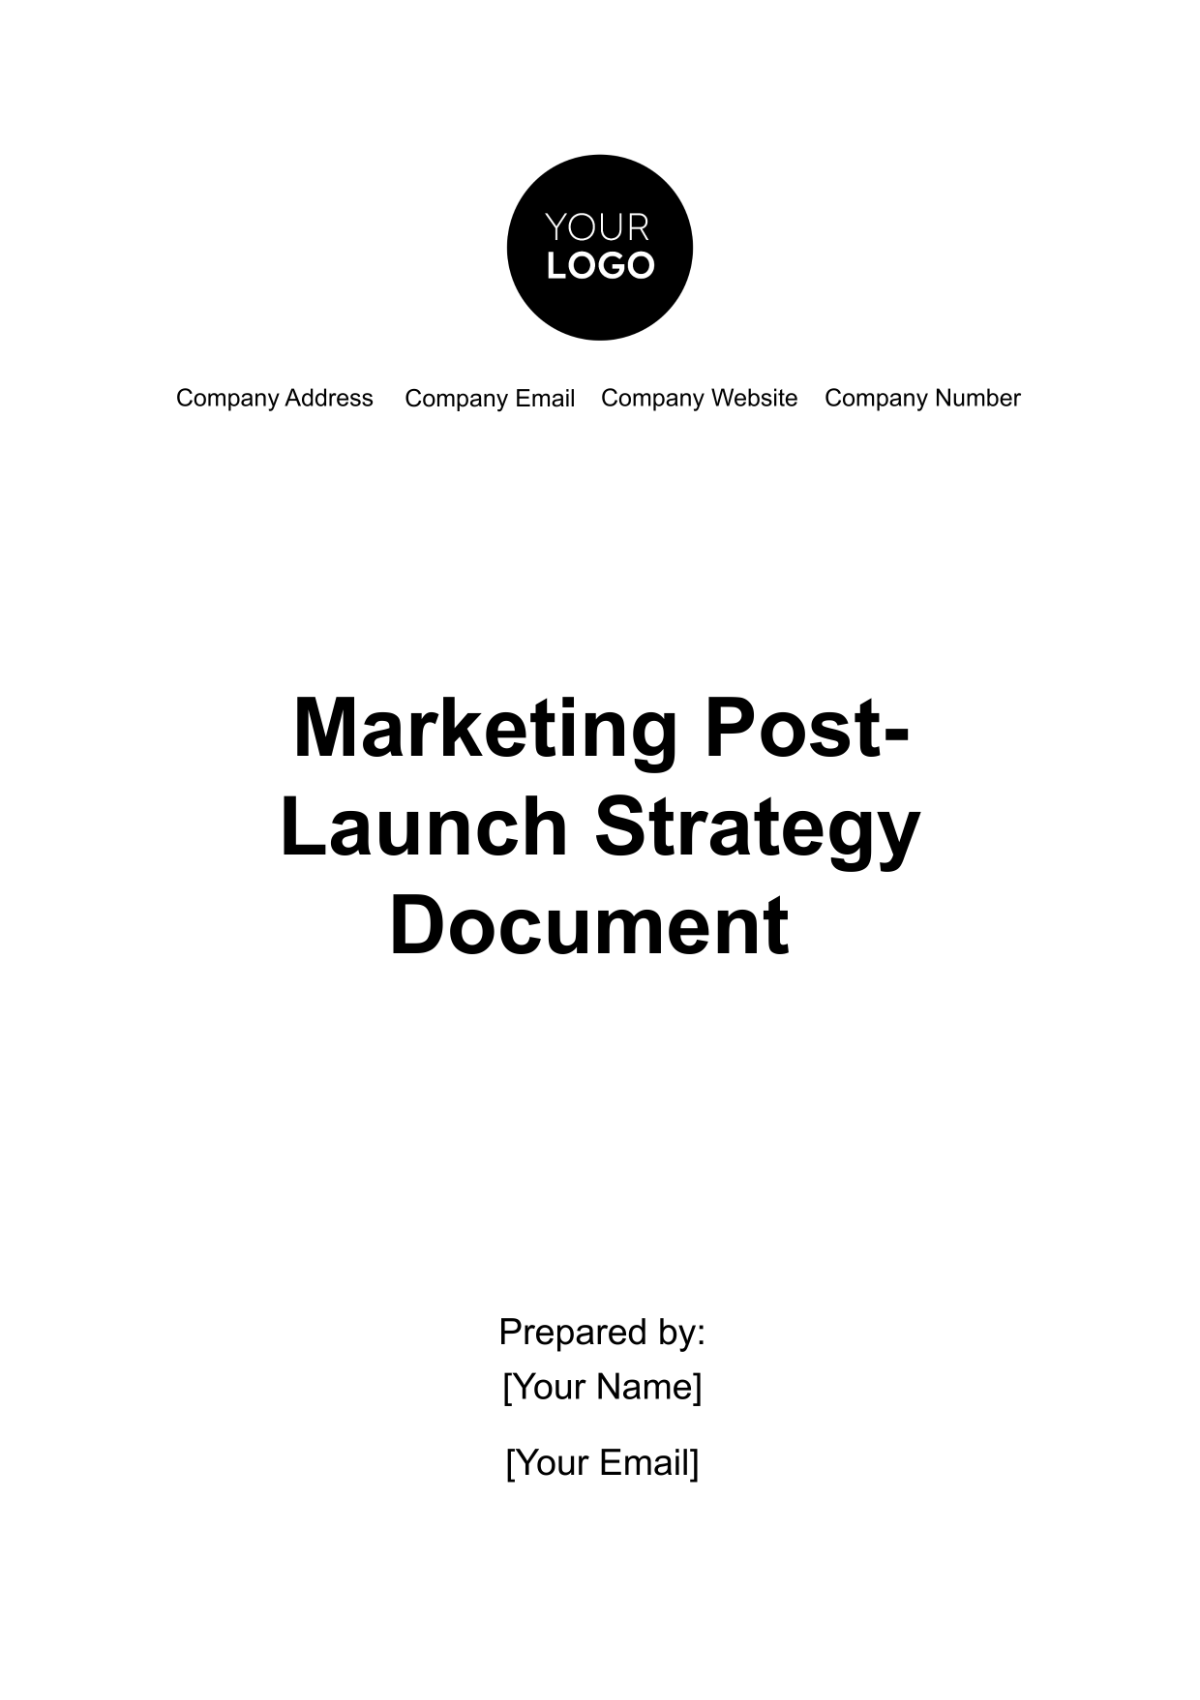 Marketing Post-Launch Strategy Document Template